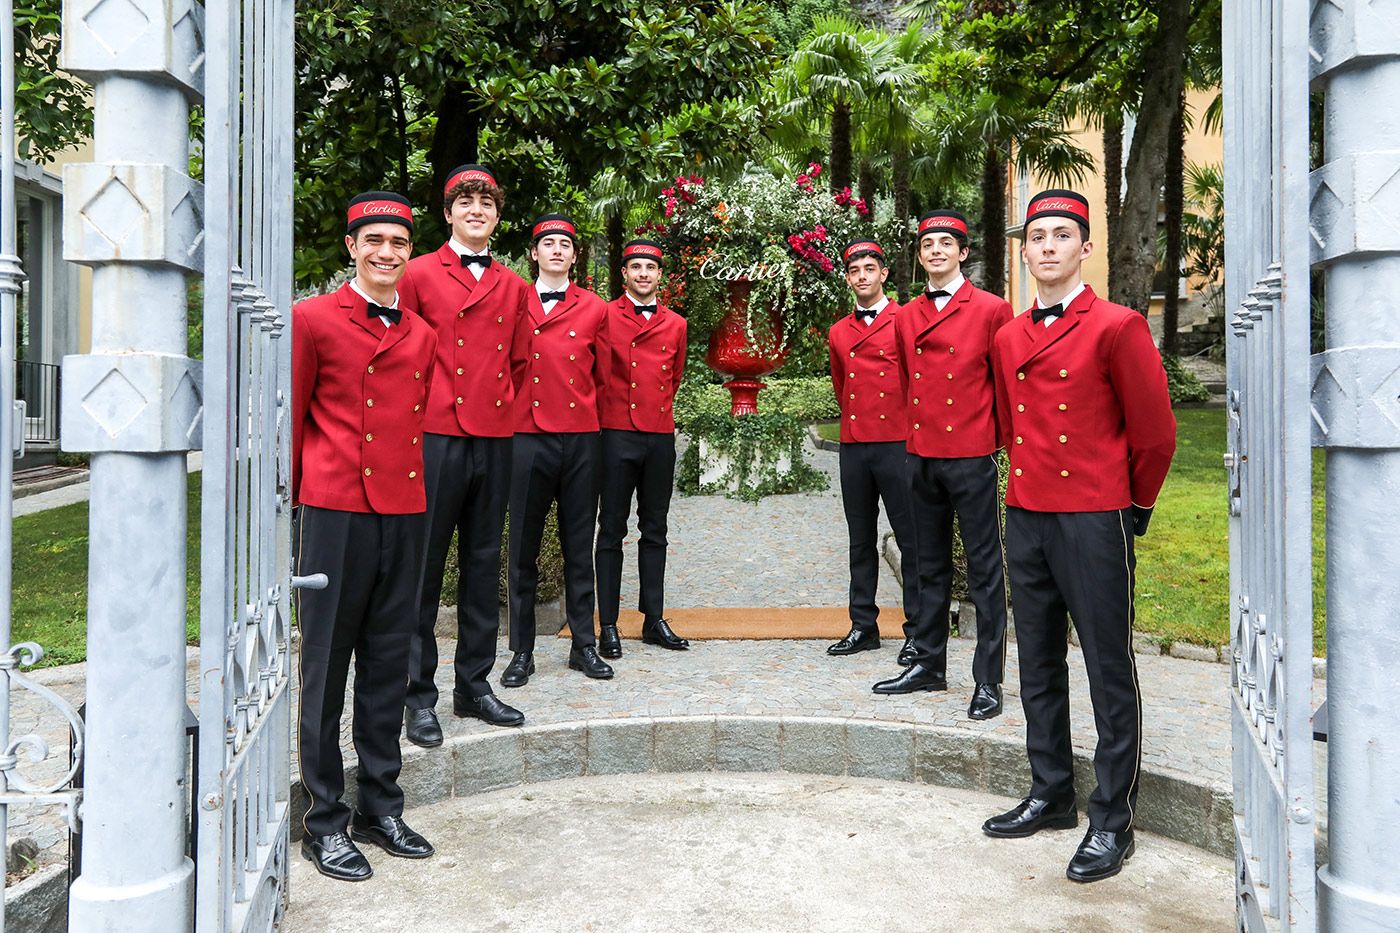 Guests arriving at the Sixième Sens par Cartier High Jewellery Collection launch in Lake Como, Italy, were welcomed by waiters in the maison's recognisable red hue